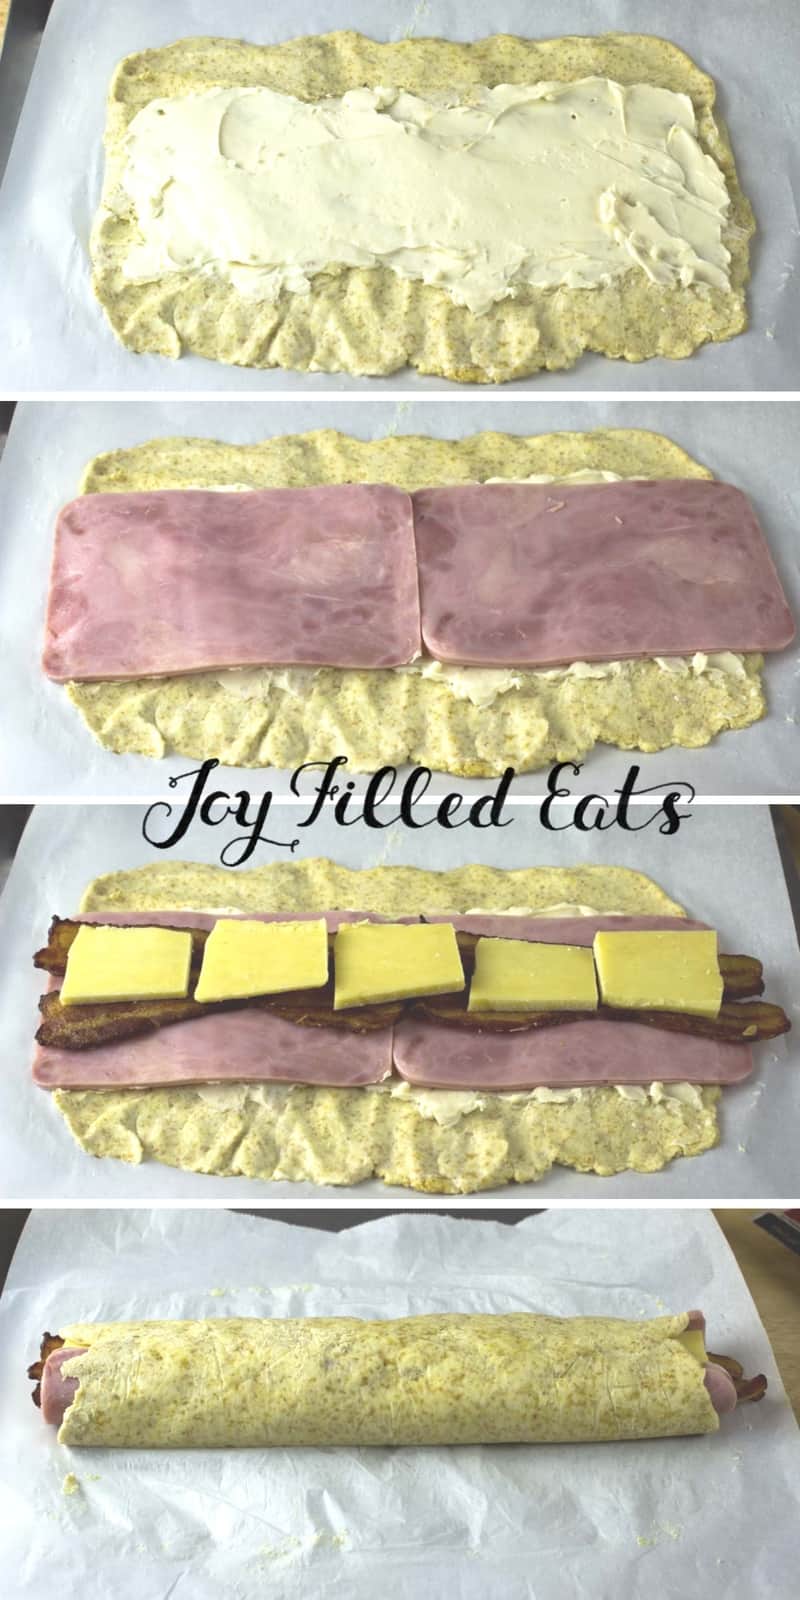 collage of images displaying stages of creating a loaded stromboli with the Joy Filled Eats logo